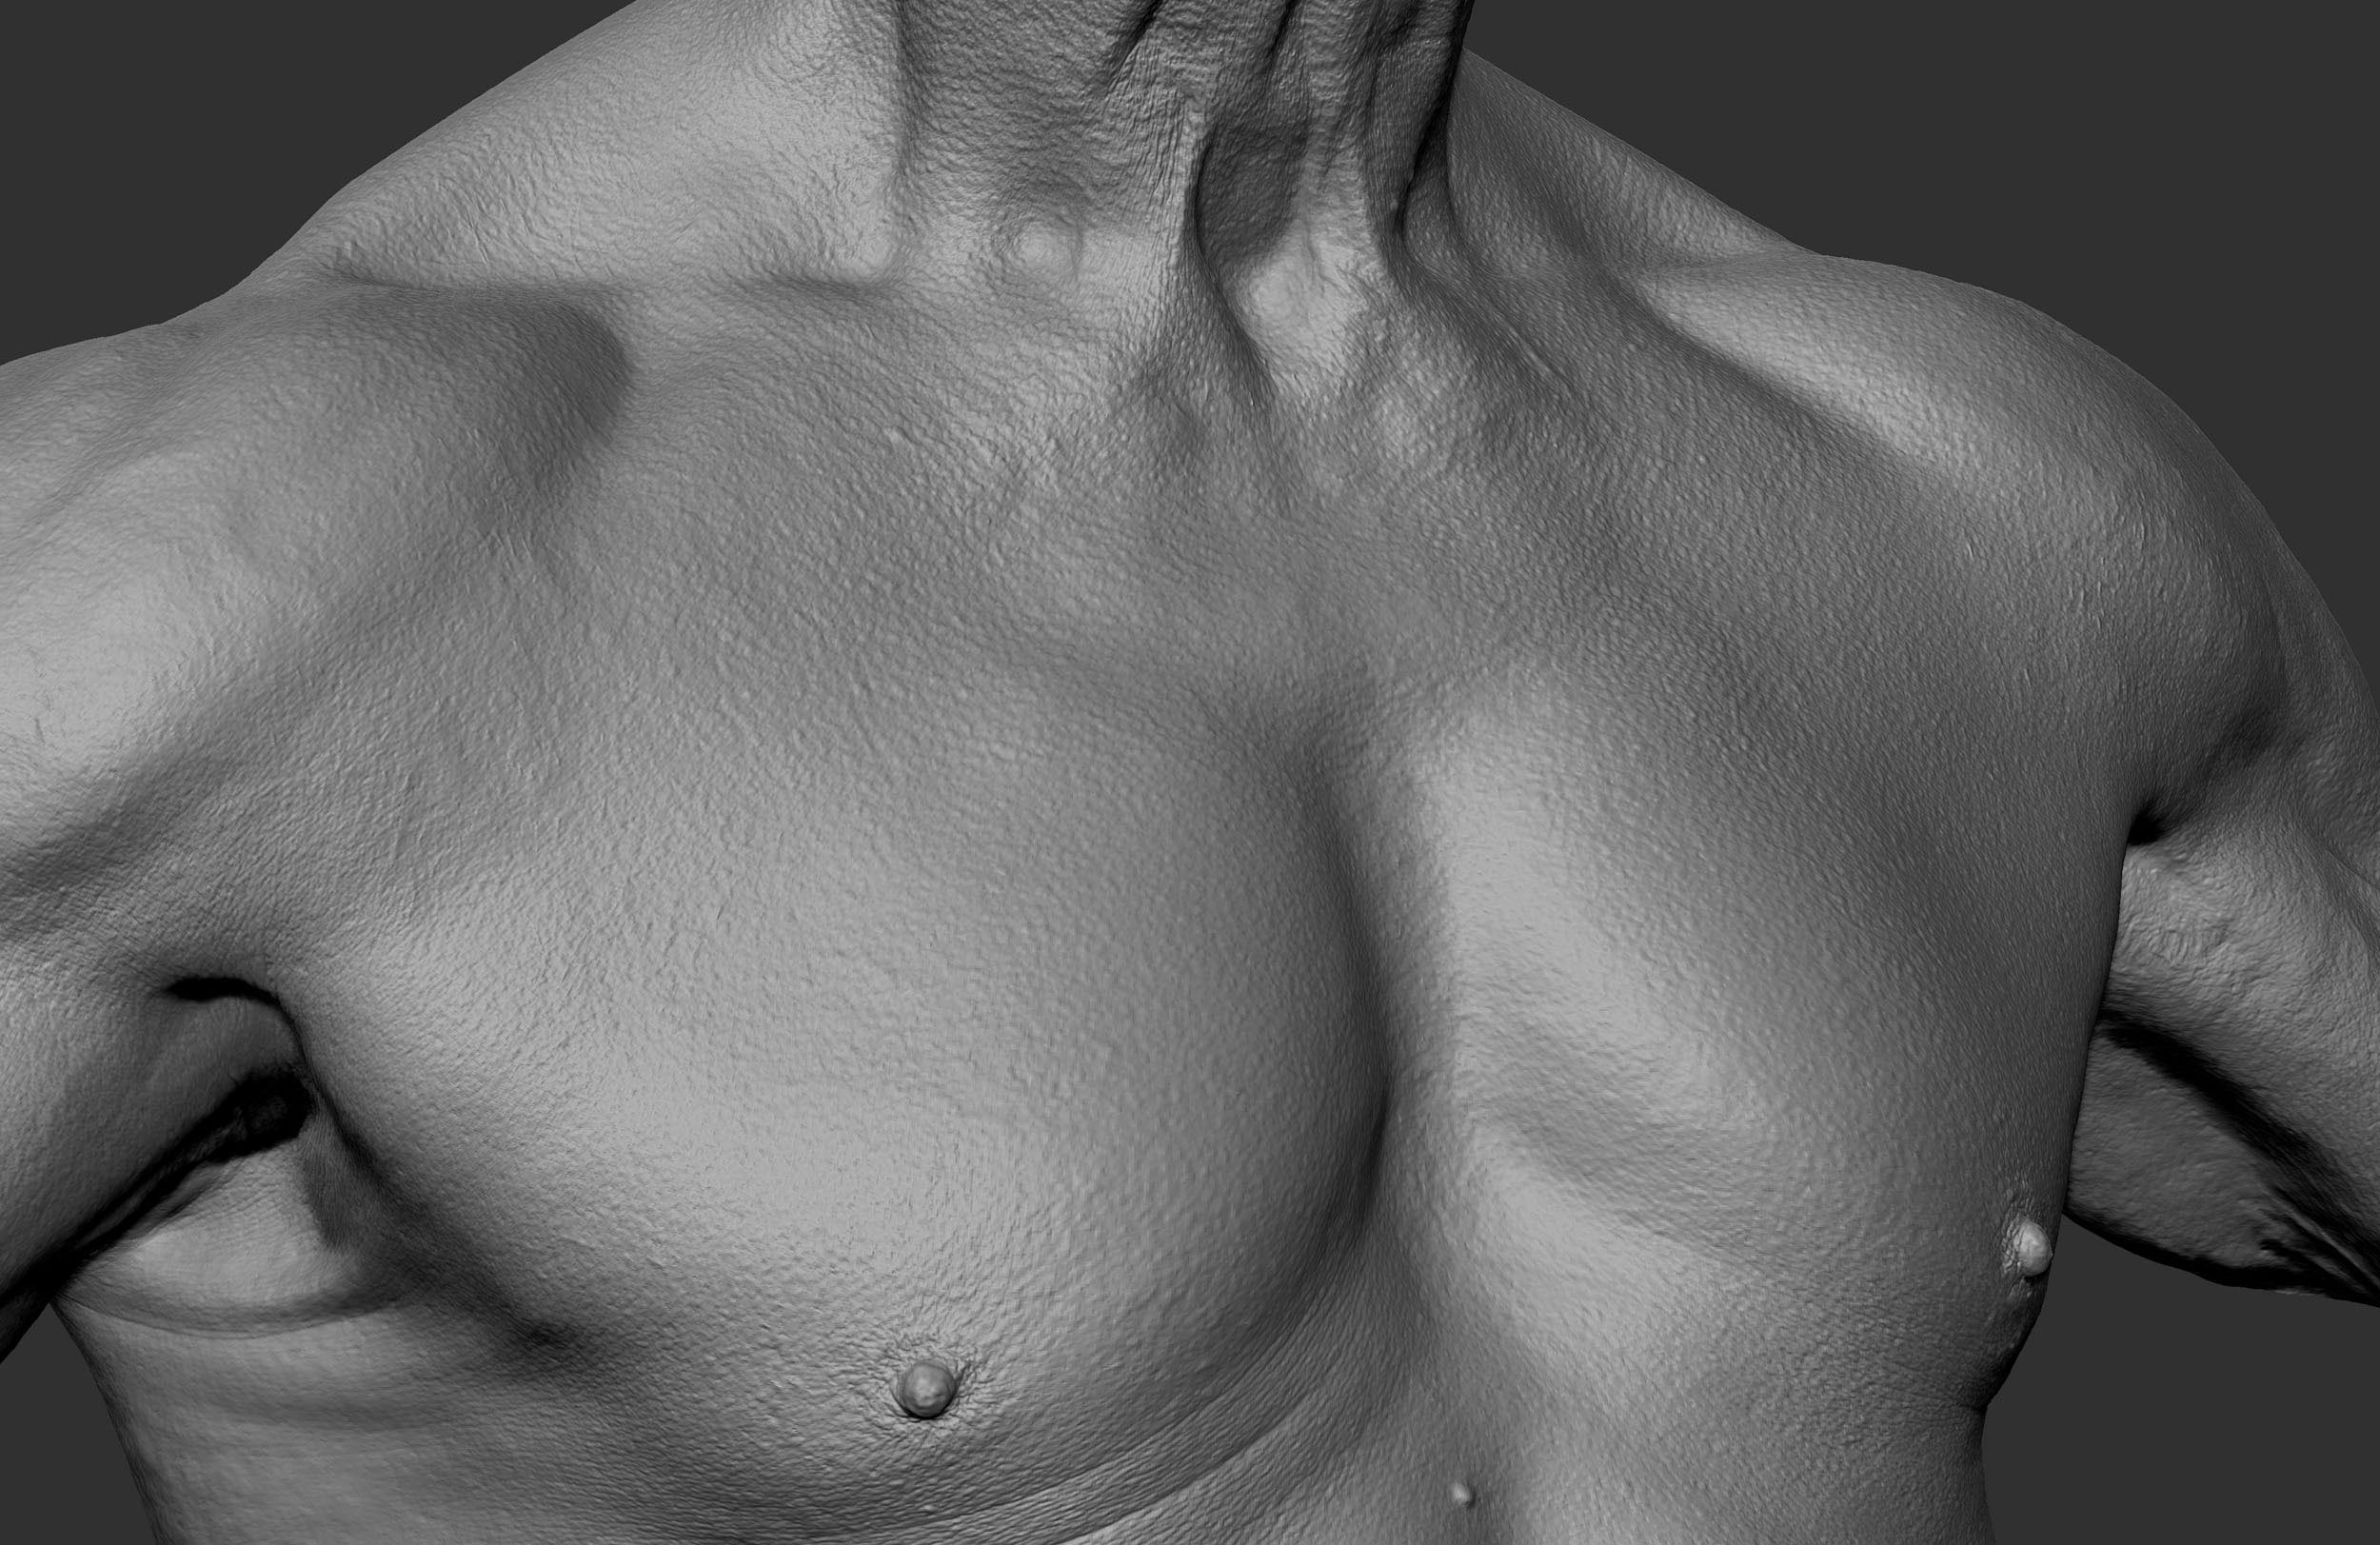 Male aged chest close up in Zbrush